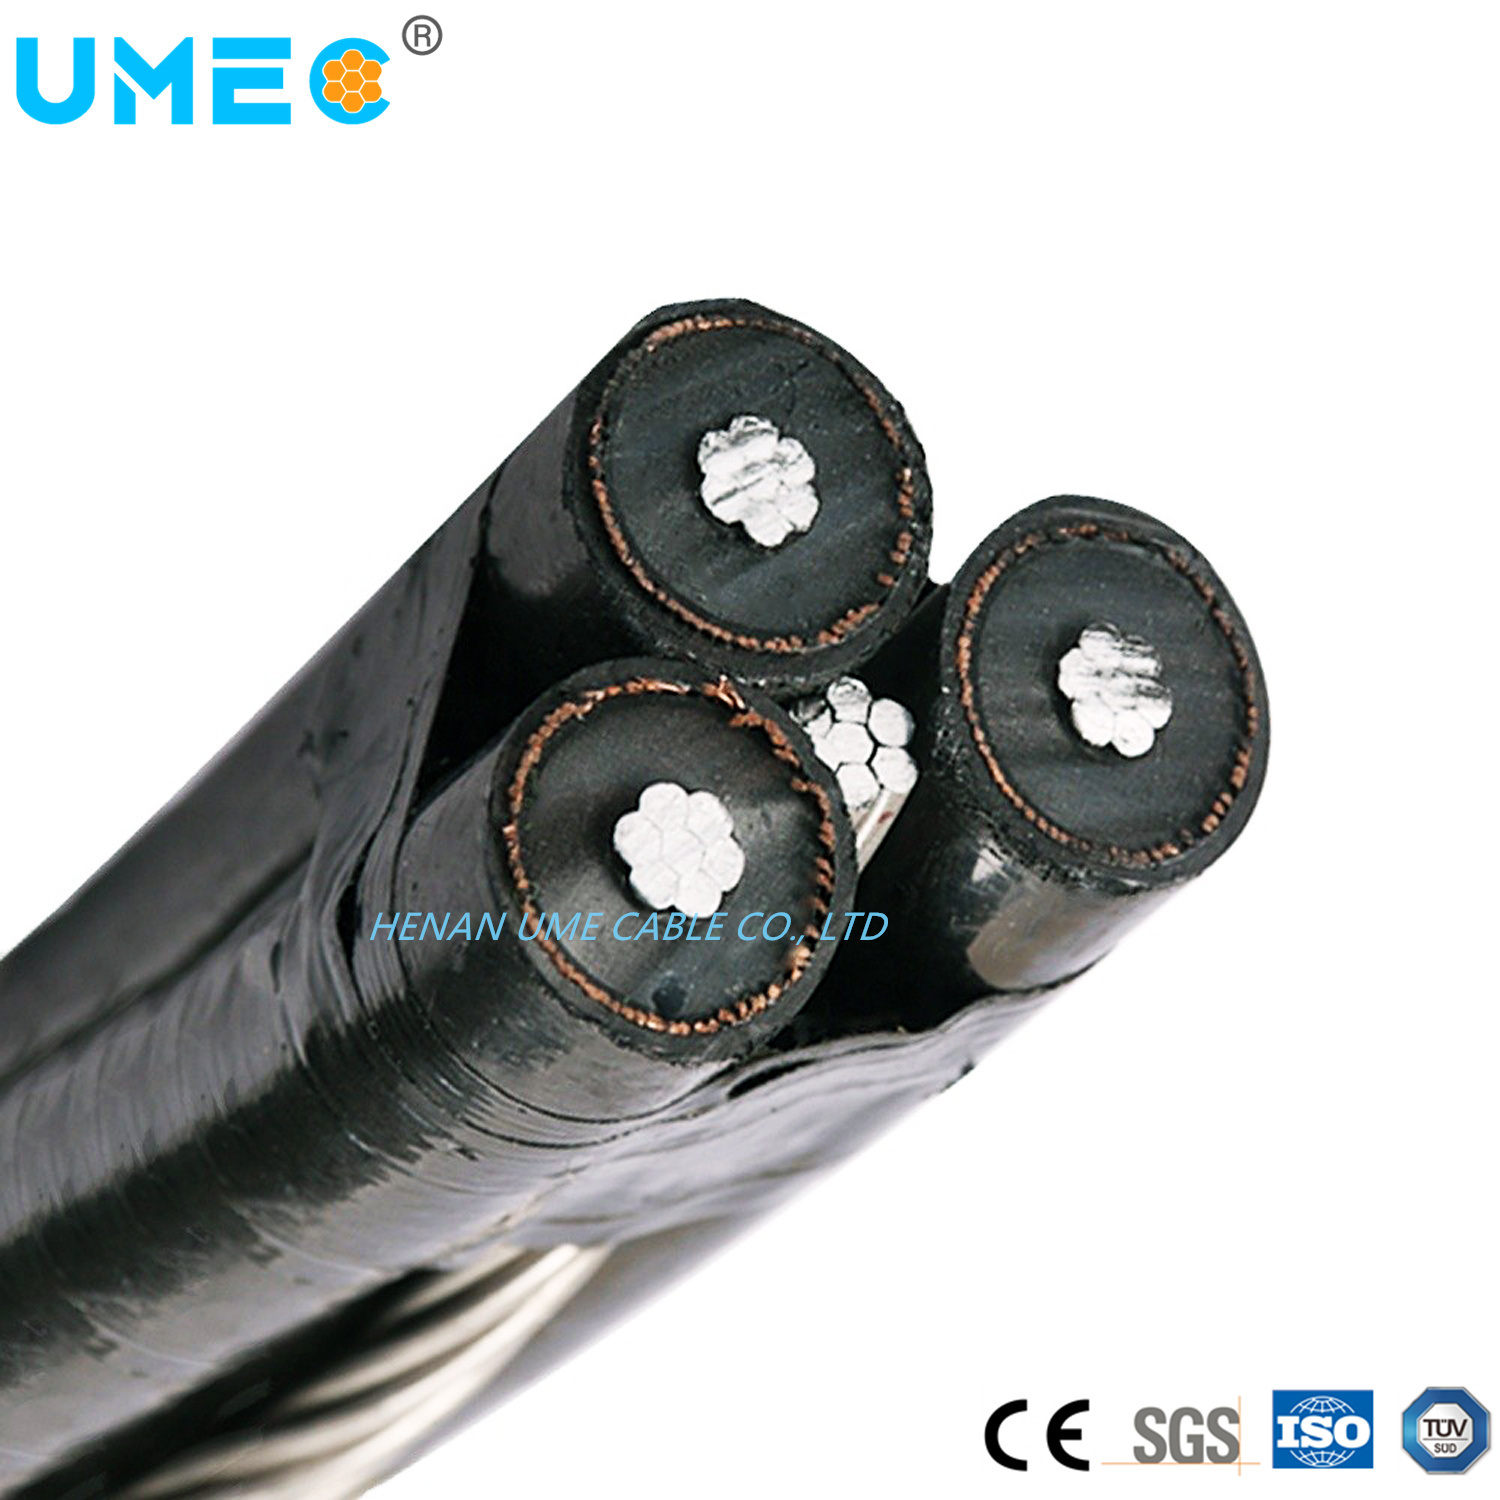 China Manufacturer Direct 11kv 33kv 16sqmm 120sqmm 185sqmm Mv Overhead Cable 5 Cores Aluminum Conductor ABC Cable